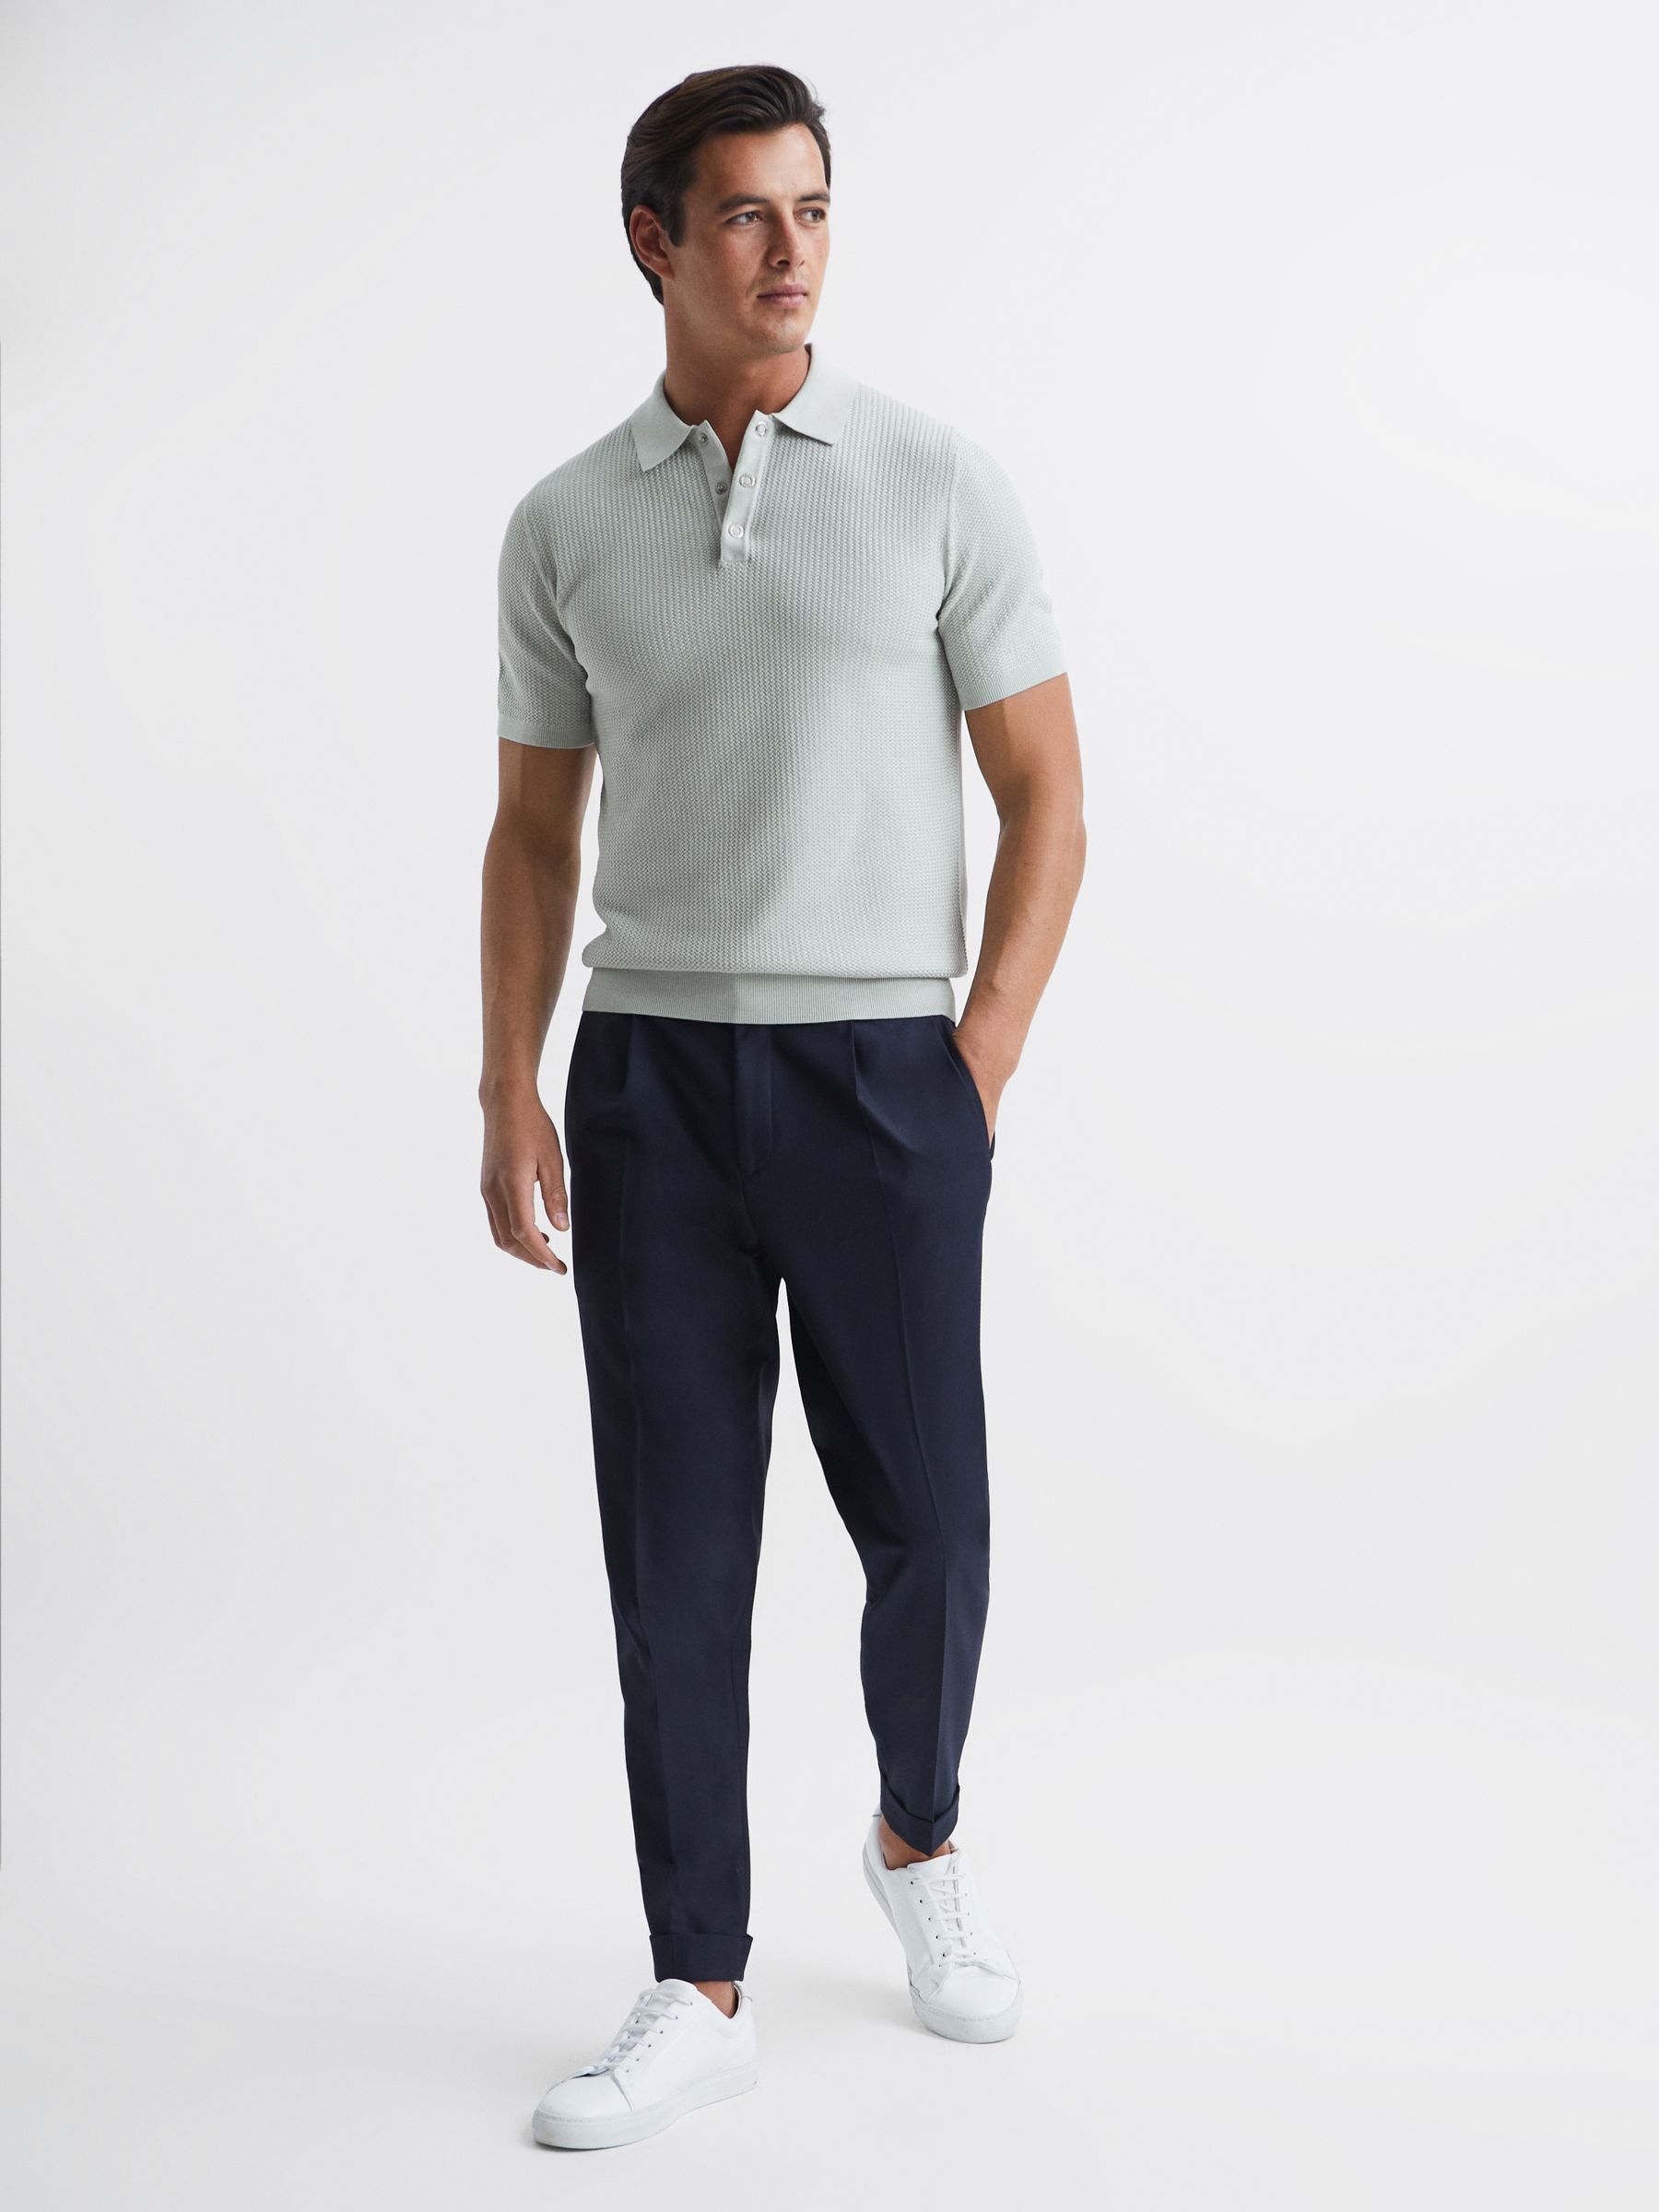 Press Stud Textured Polo Shirt in Soft Sage - REISS